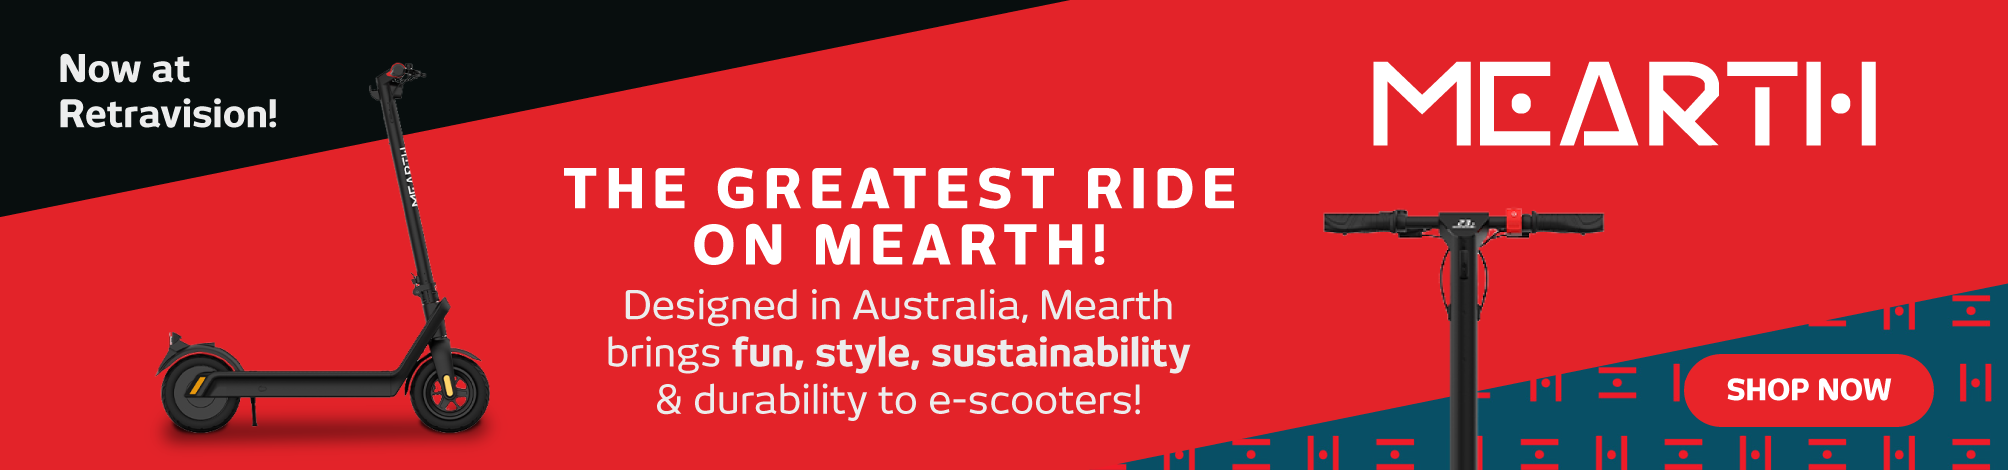 Mearth E-Scooters Now At Retravision!